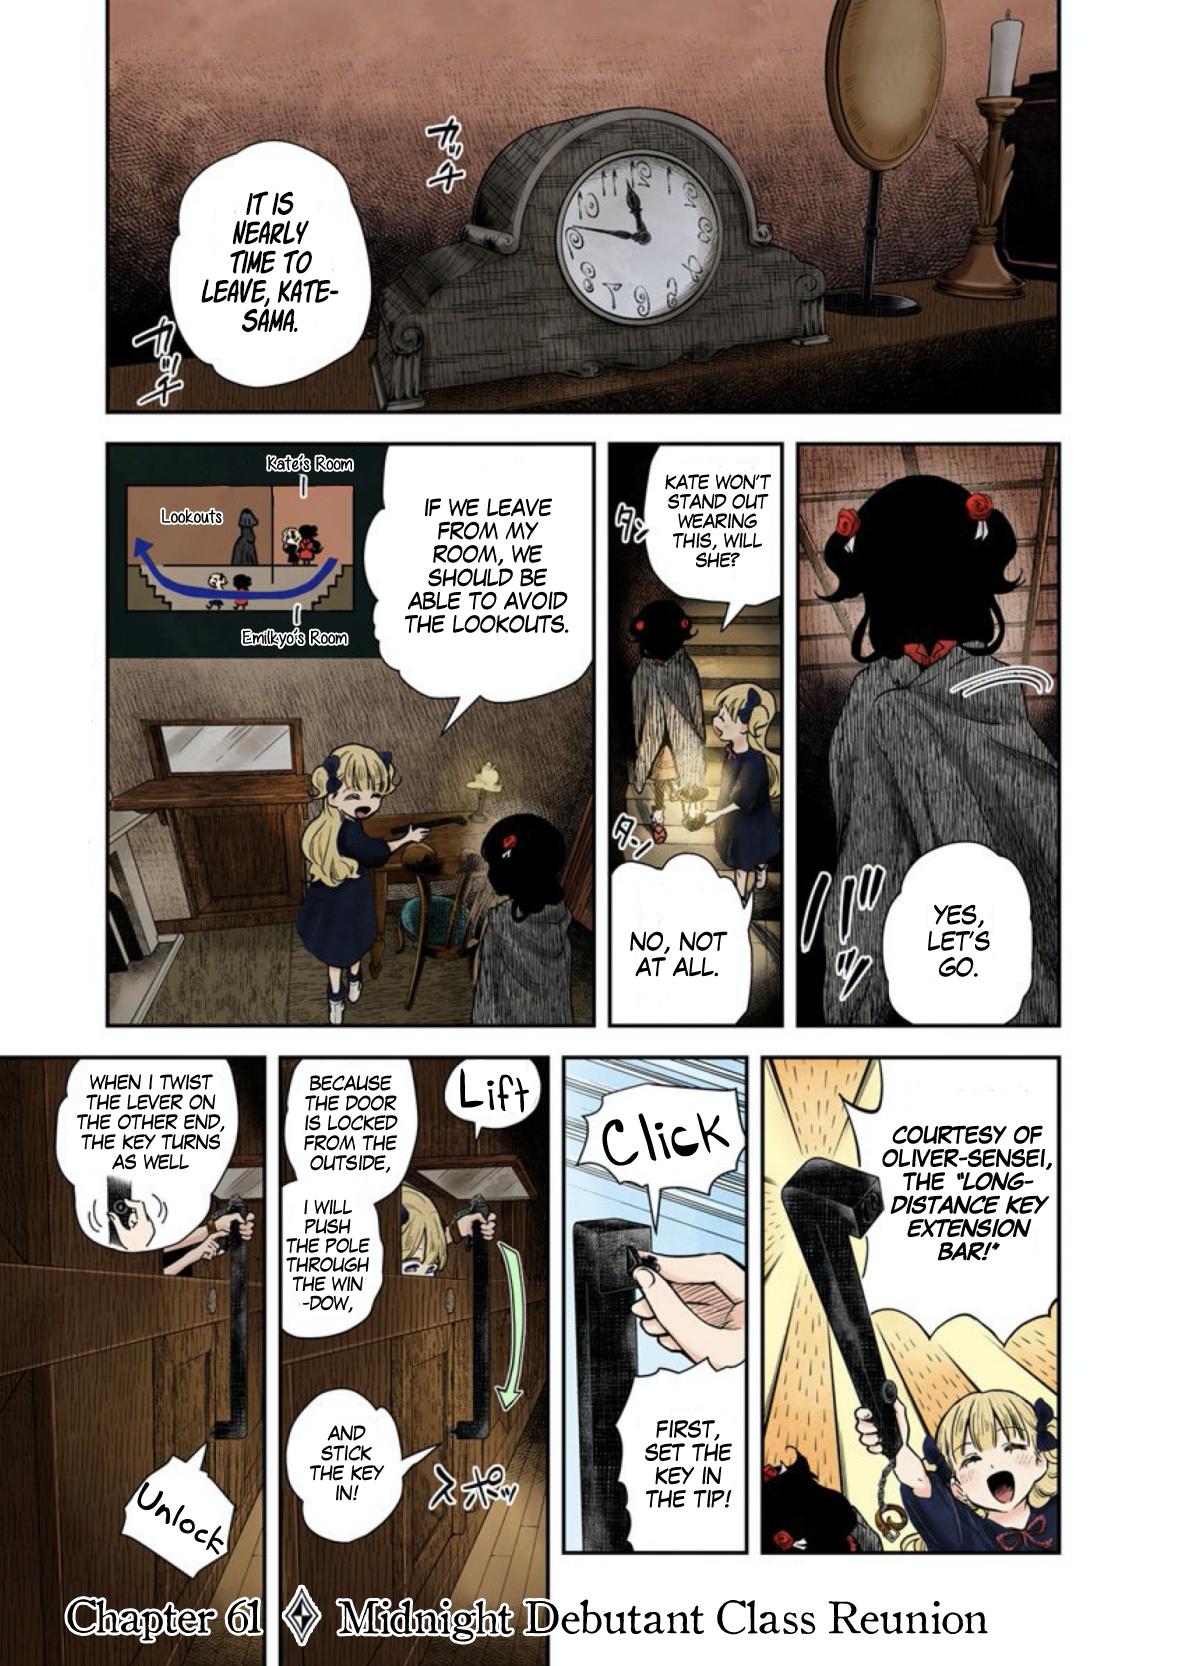 Shadow House Vol.5 Chapter 61: Midnight Debutant Class Reunion page 2 - 